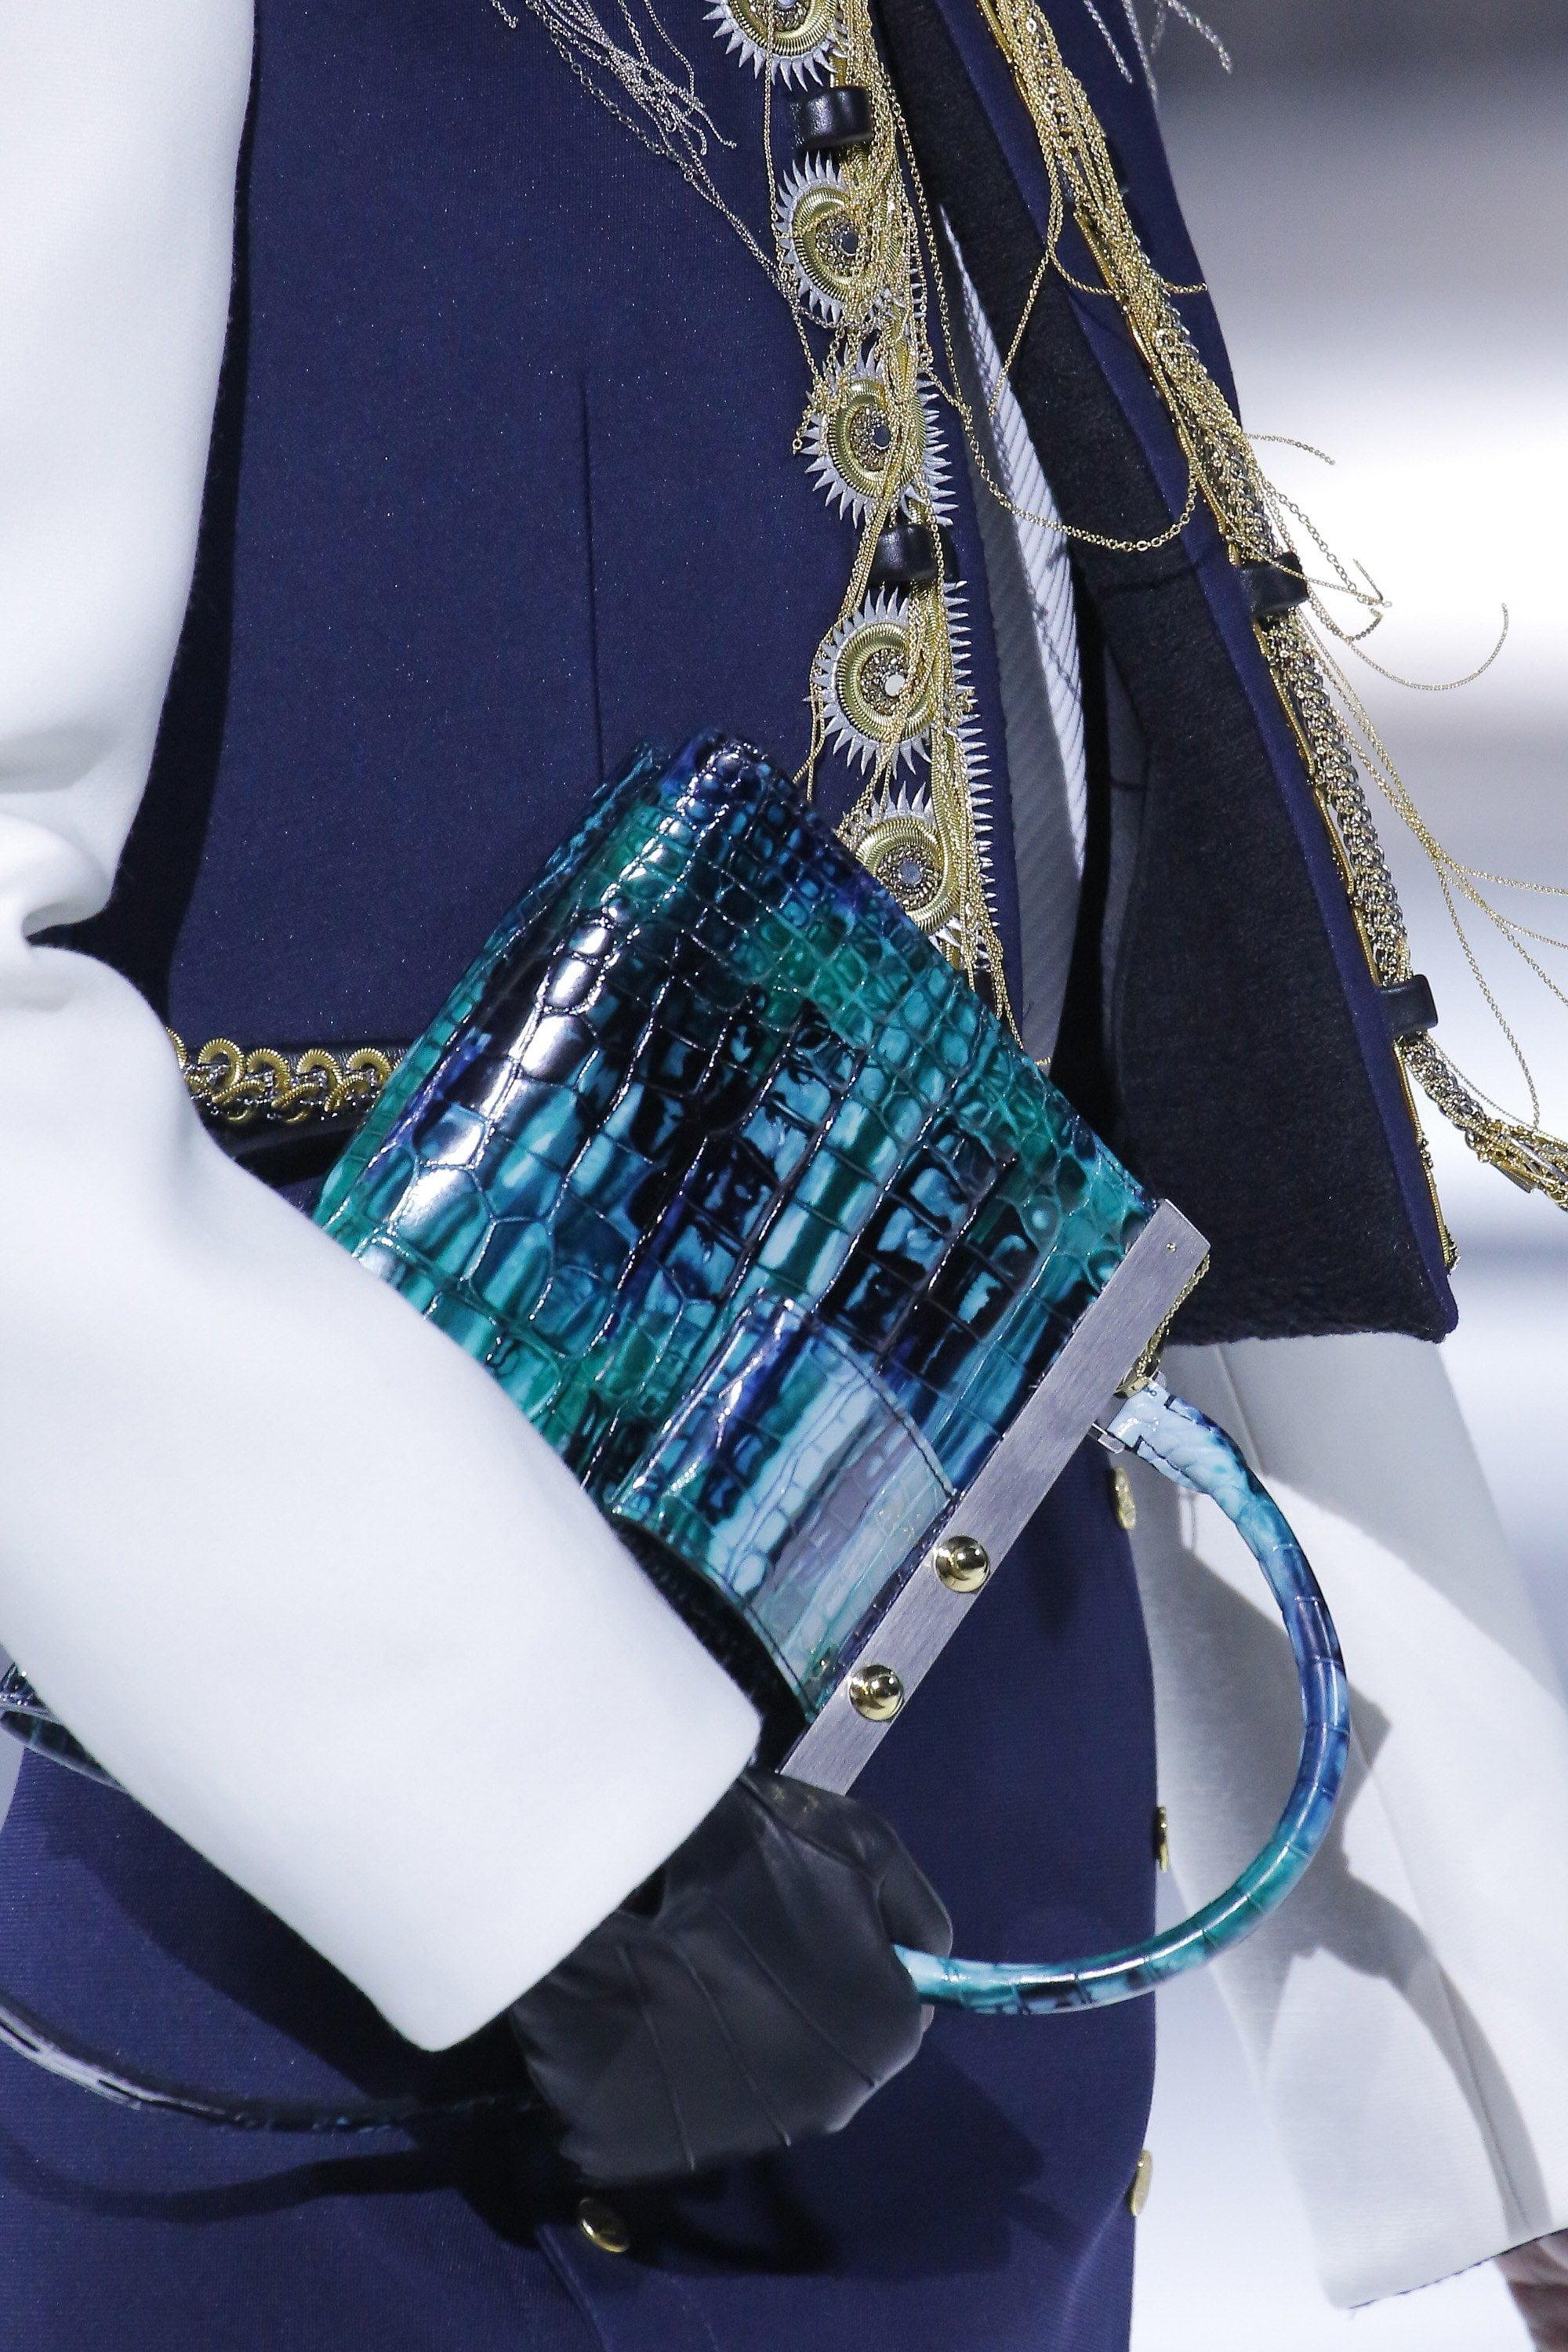 Louis Vuitton on X: Subtle radiance. This season's #LVTwist takes on an  elegantly crafted interpretation of the bag's unique lock, adding a subtle  chic and contemporary touch. Discover the #LouisVuitton campaign with